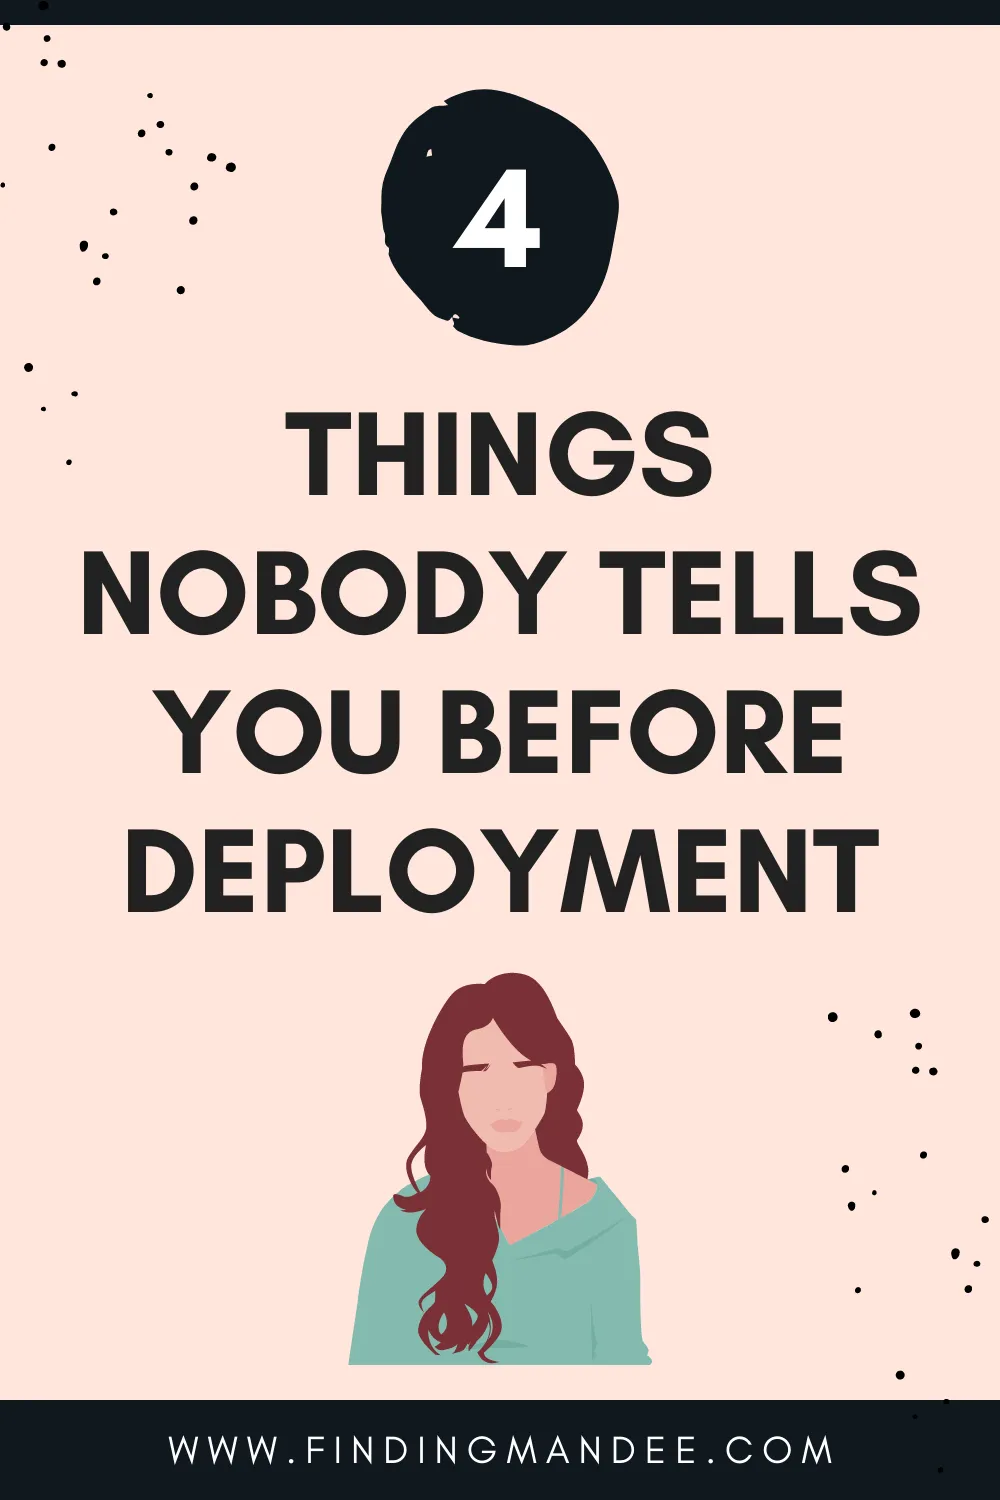 4 Things No One Tells You Before Deployment | Finding Mandee